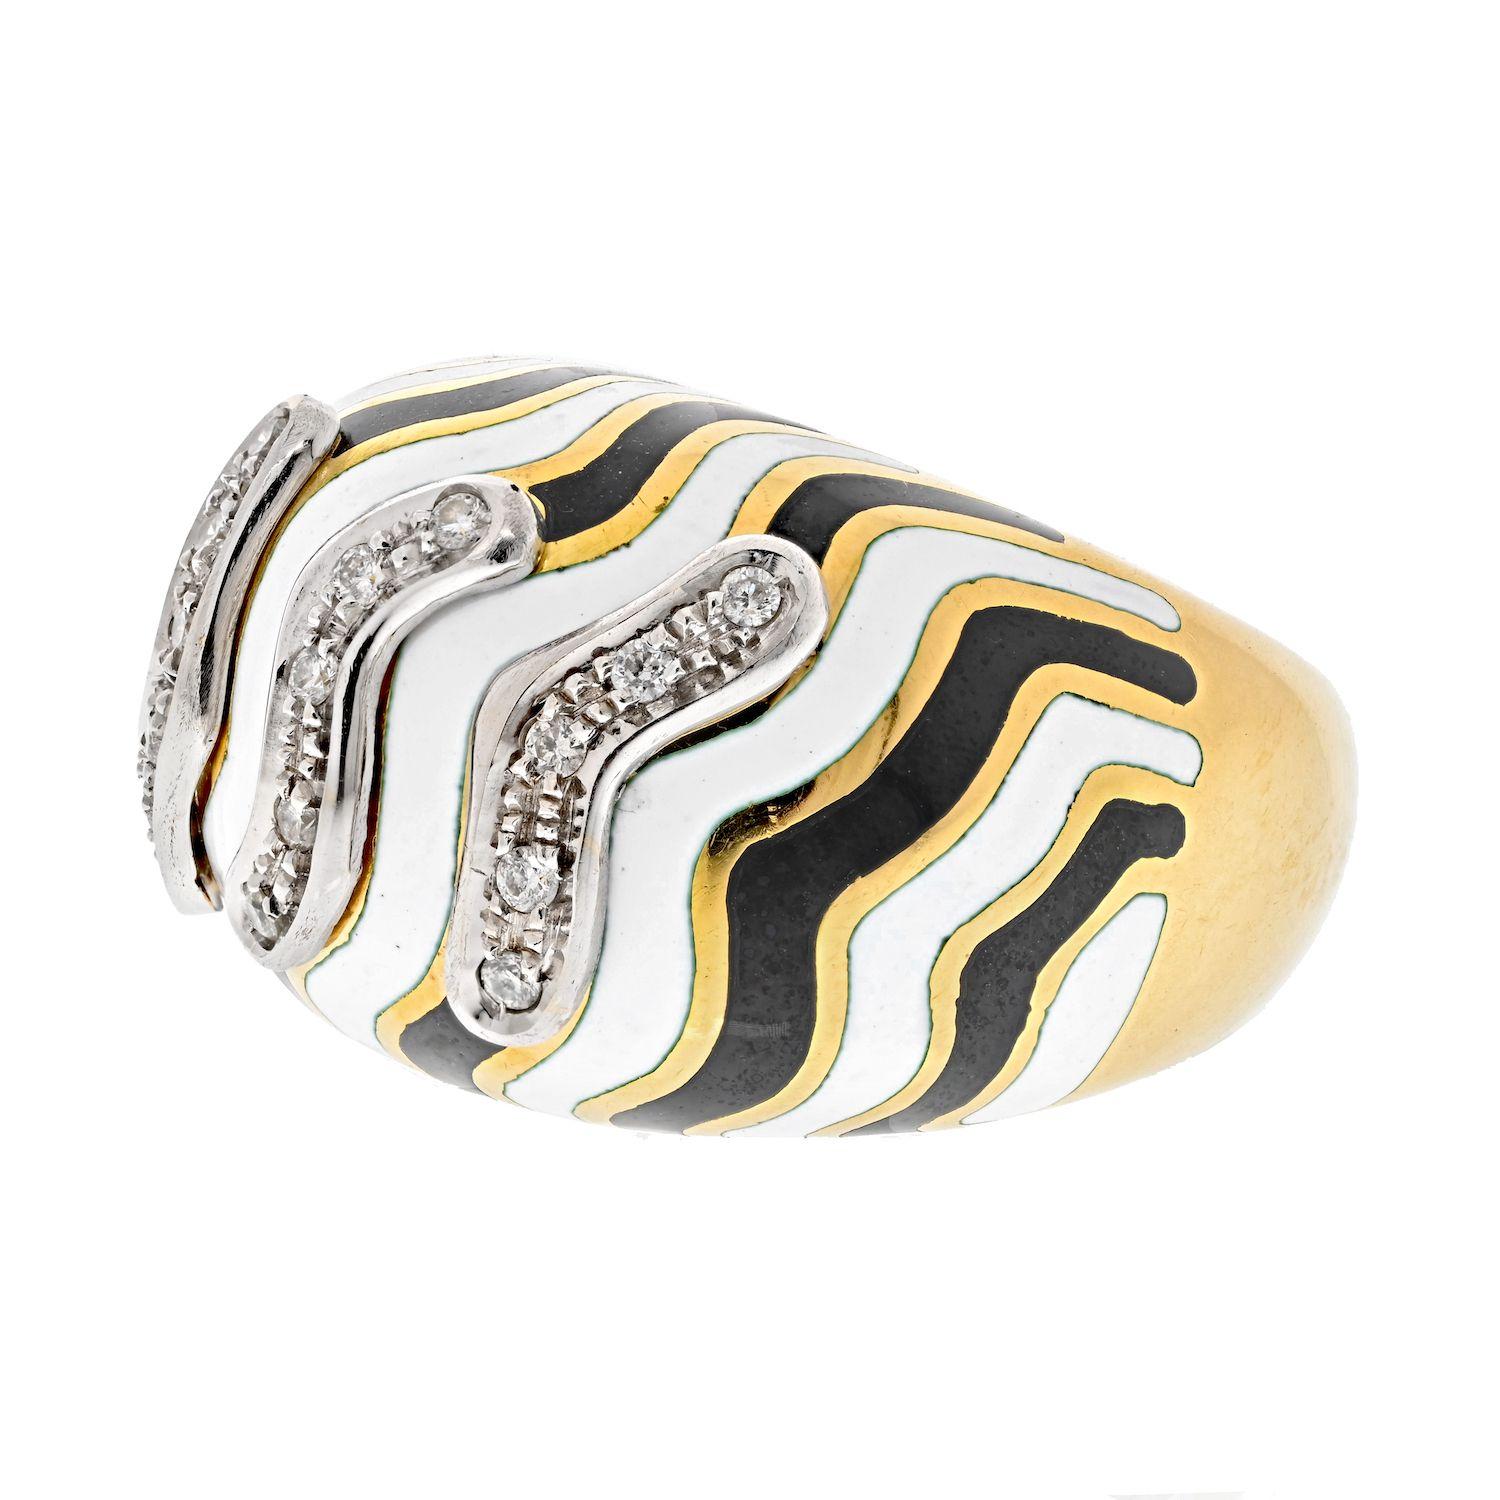 David Webb Platinum & 18K Yellow Gold Zebra Diamond Bombe Ring.
This is a lovely bombe style ring by David Webb designed with his signature zebra enameled striped pattern and a touch of round cut diamonds on the top. Perfect cocktail ring to be out